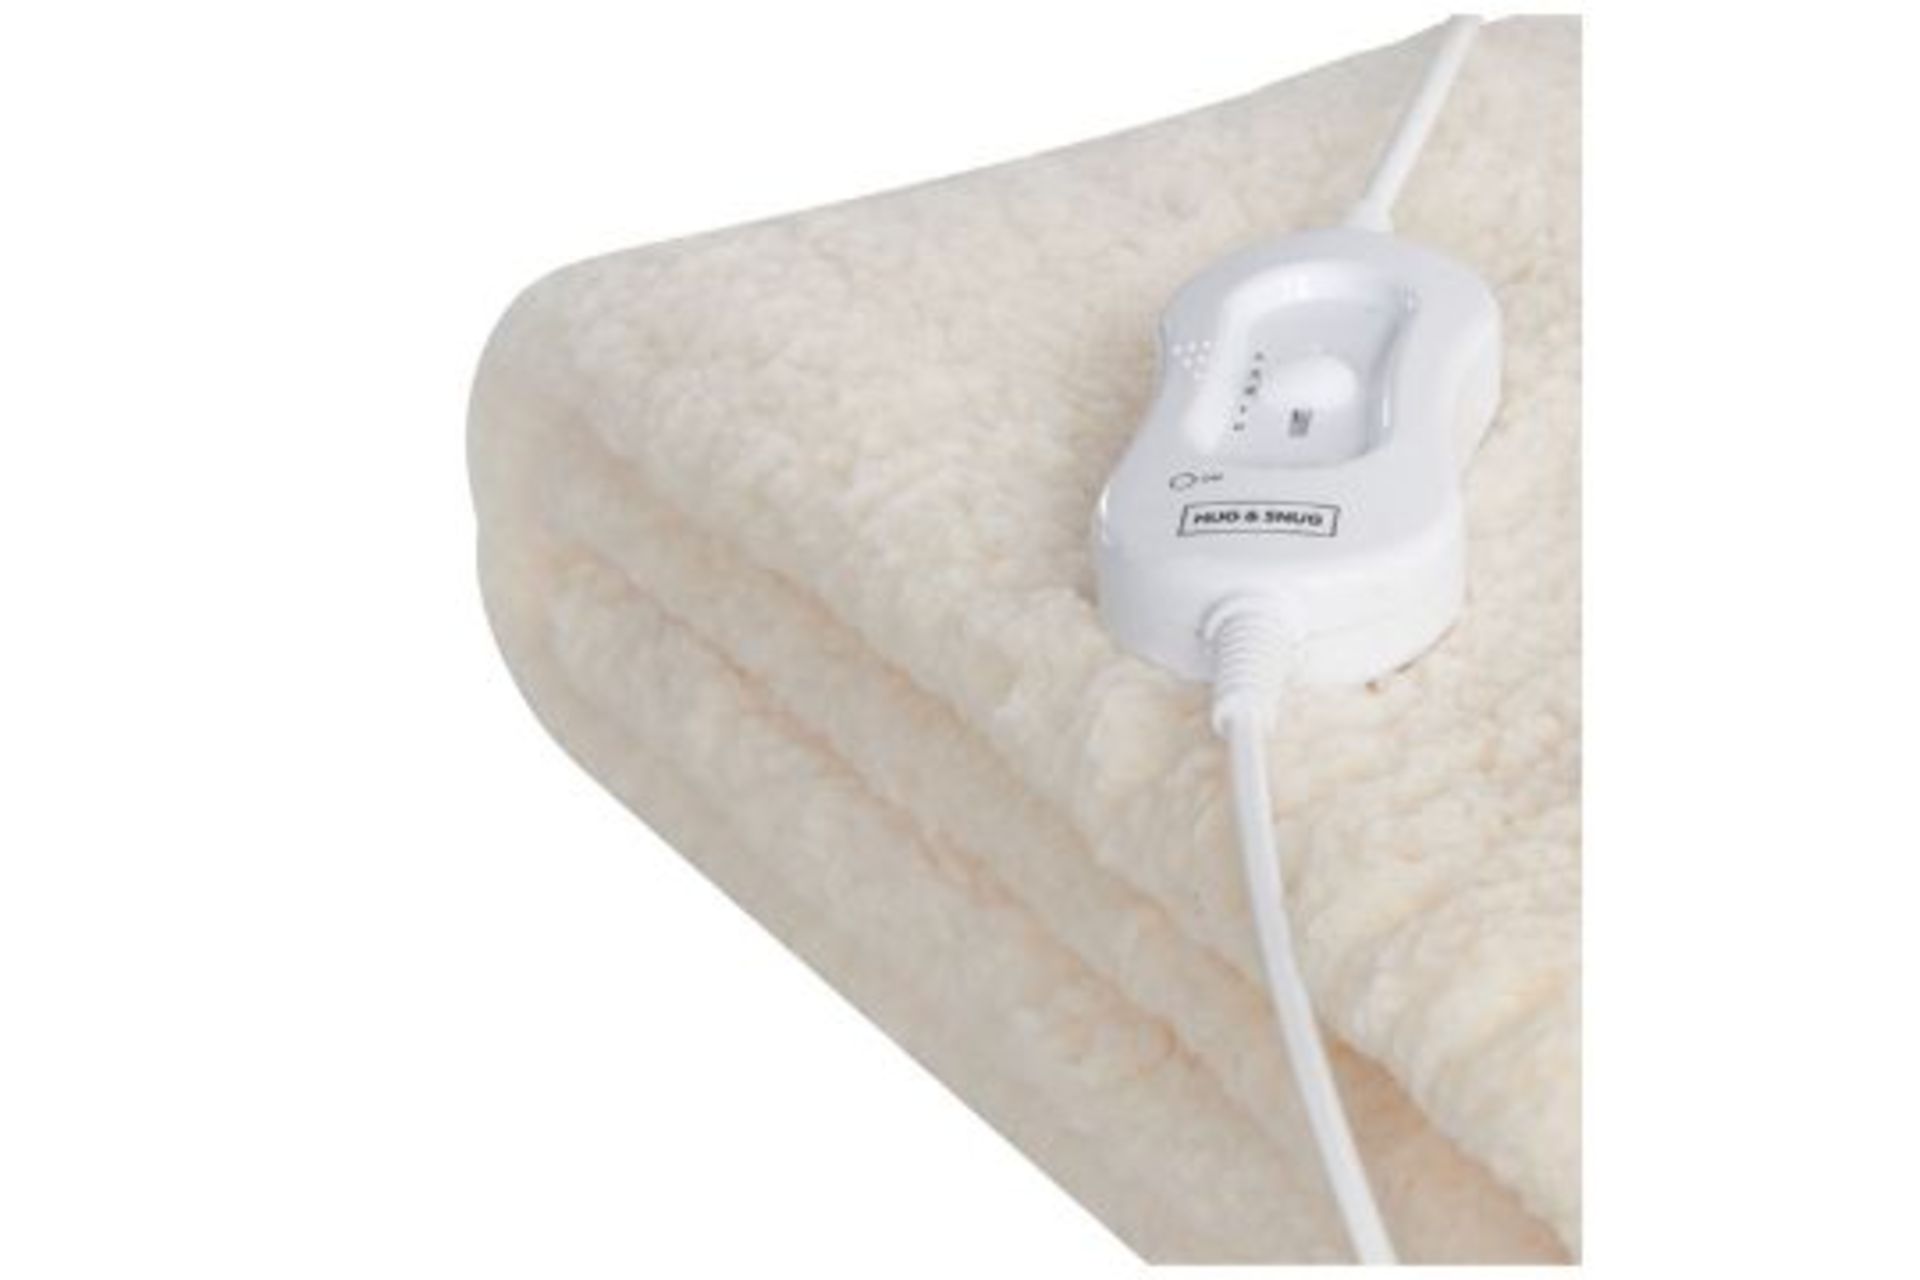 Brand New Single Teddy Fleece Underblanket Heated (Delivery Band A)